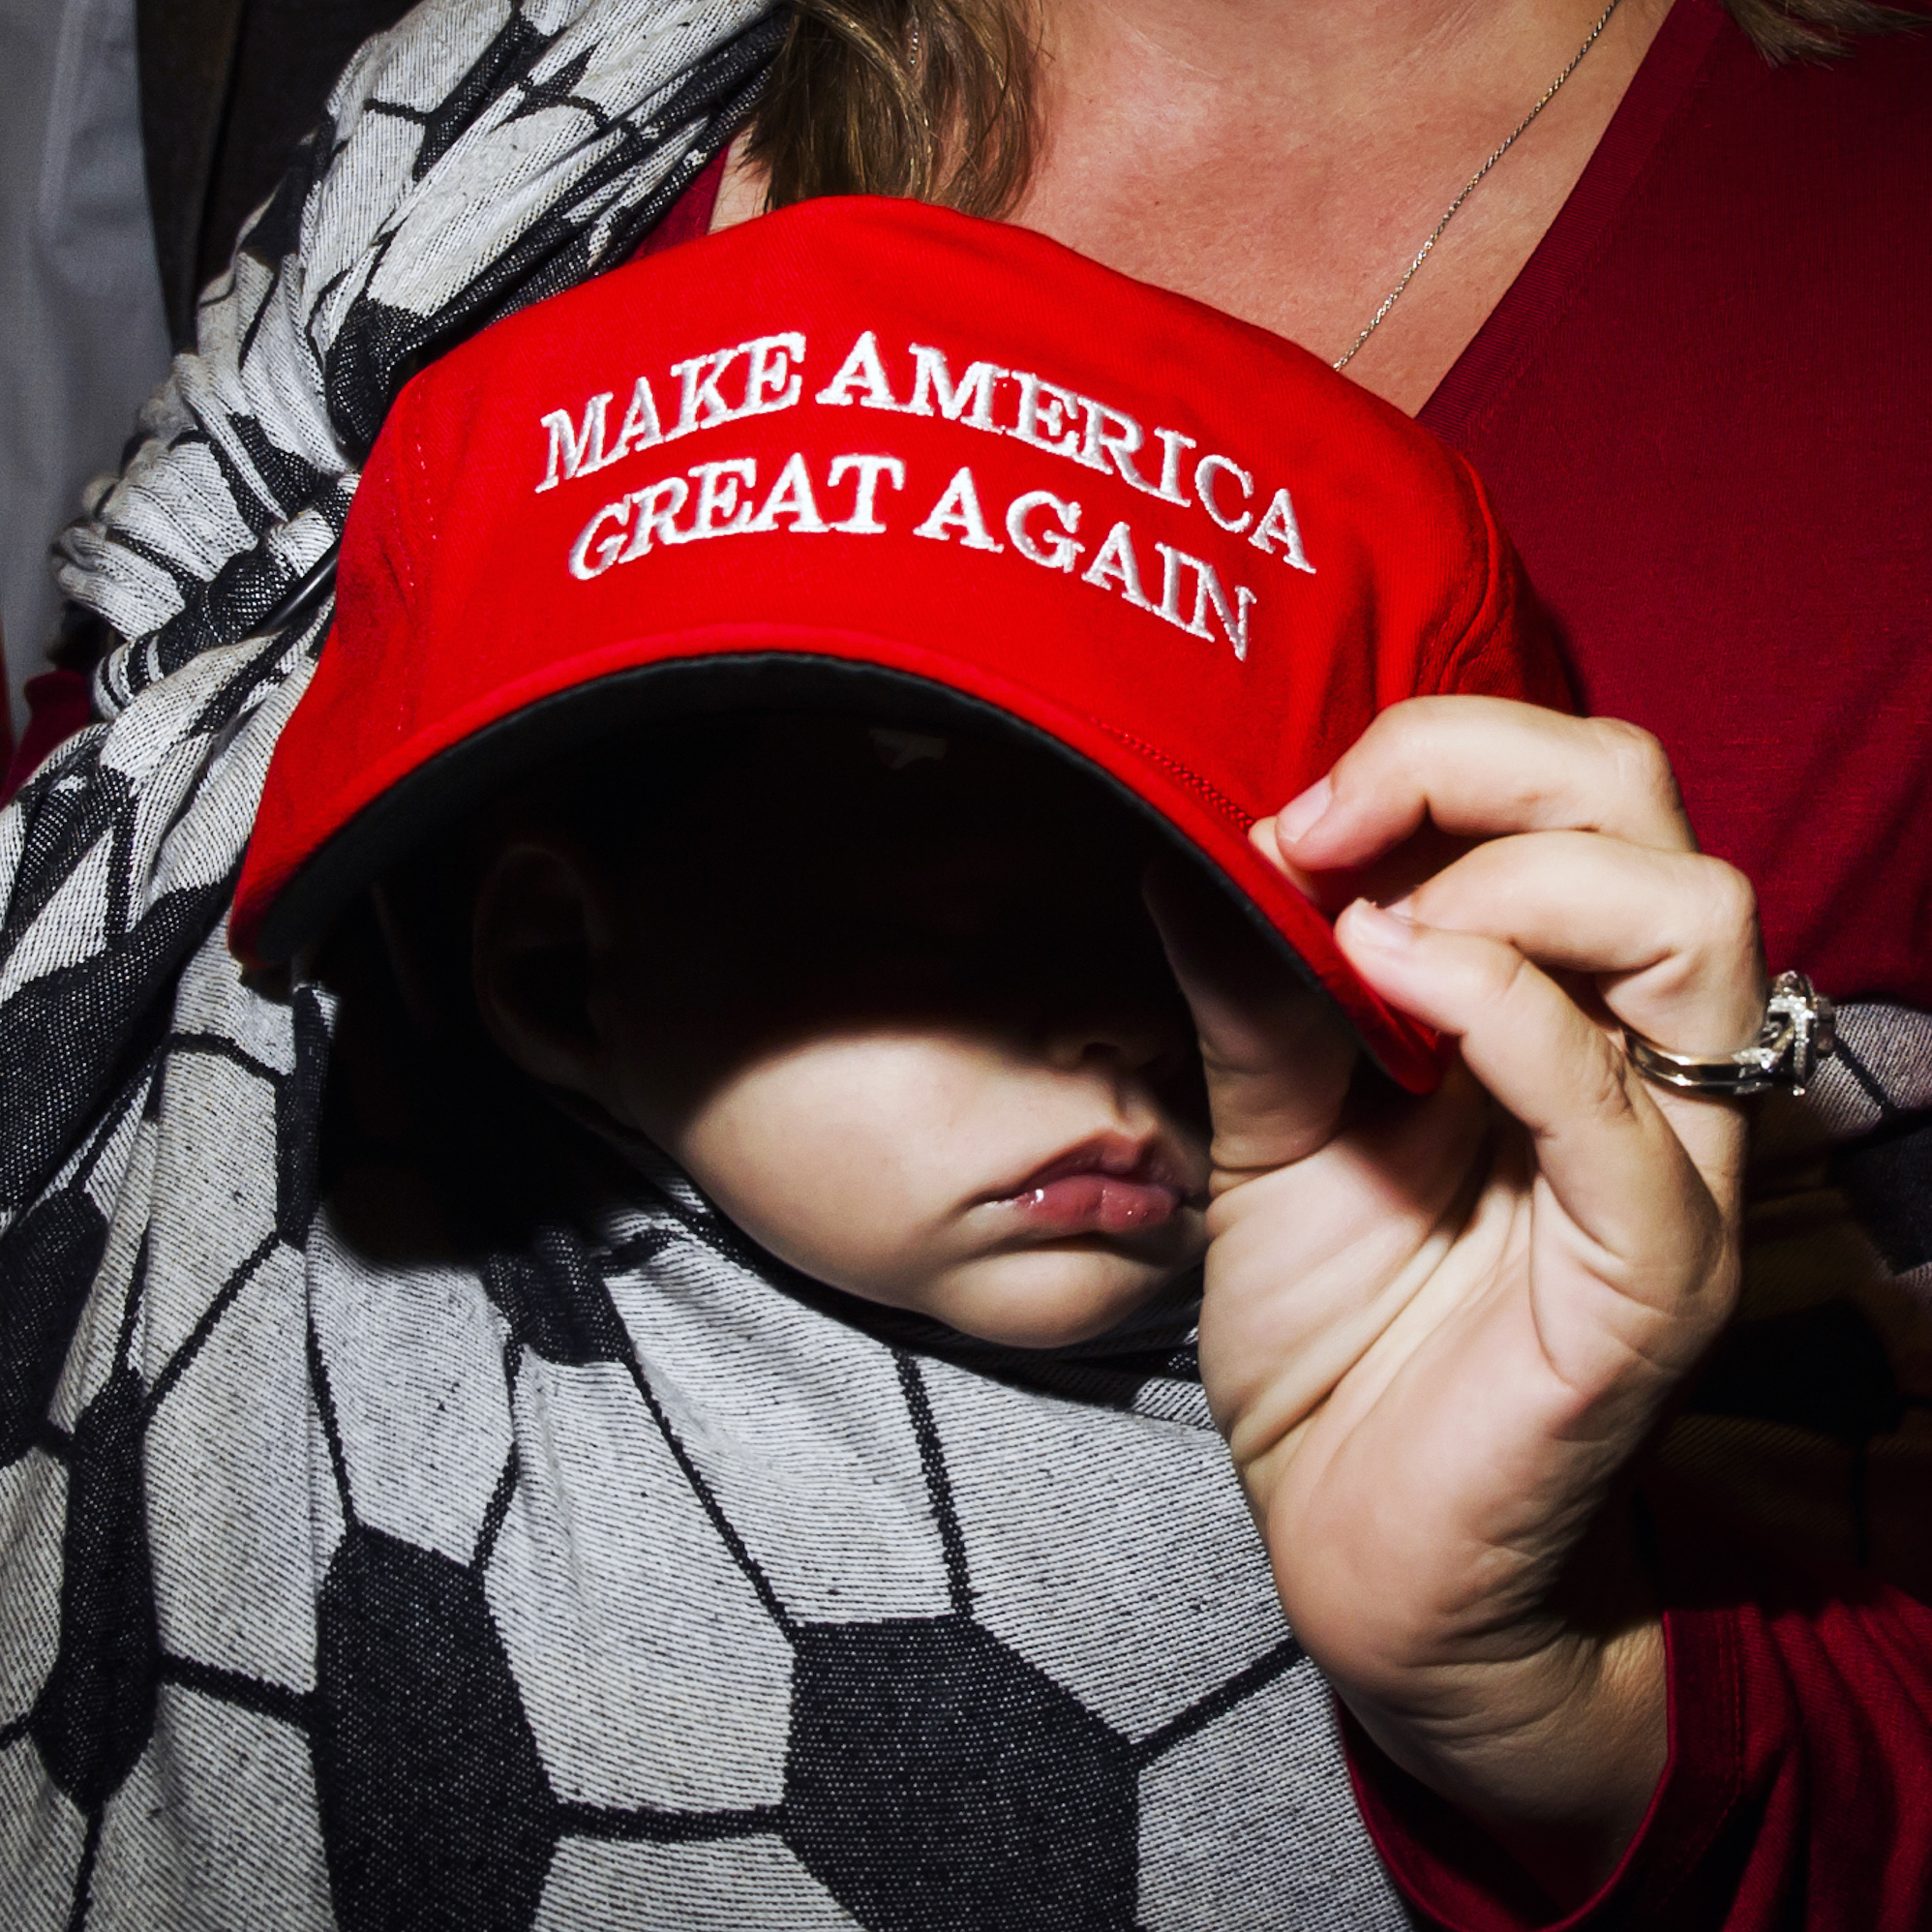 Scenes at an election night party for Republican President-elect Donald Trump on Tuesday, Nov. 8, 2016 in New York's Manhattan borough. (Dina Litovsky for TIME)